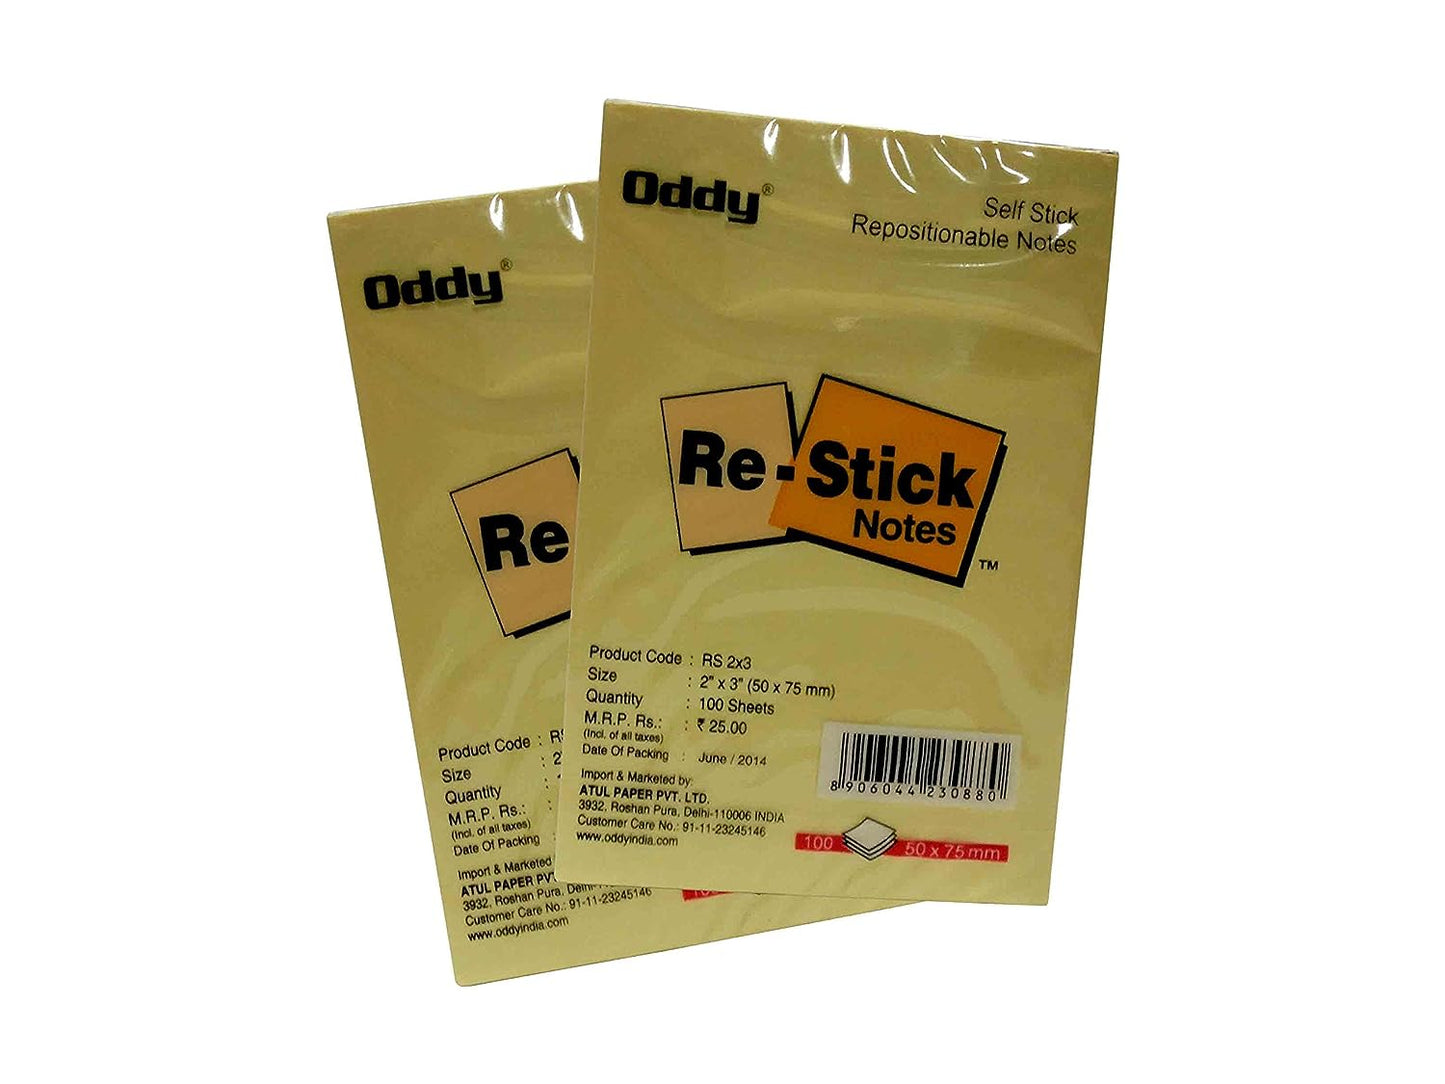 Oddy '2 X 3' Self Stick Repositionable Note Pad 100 Sheets (Set of 10)